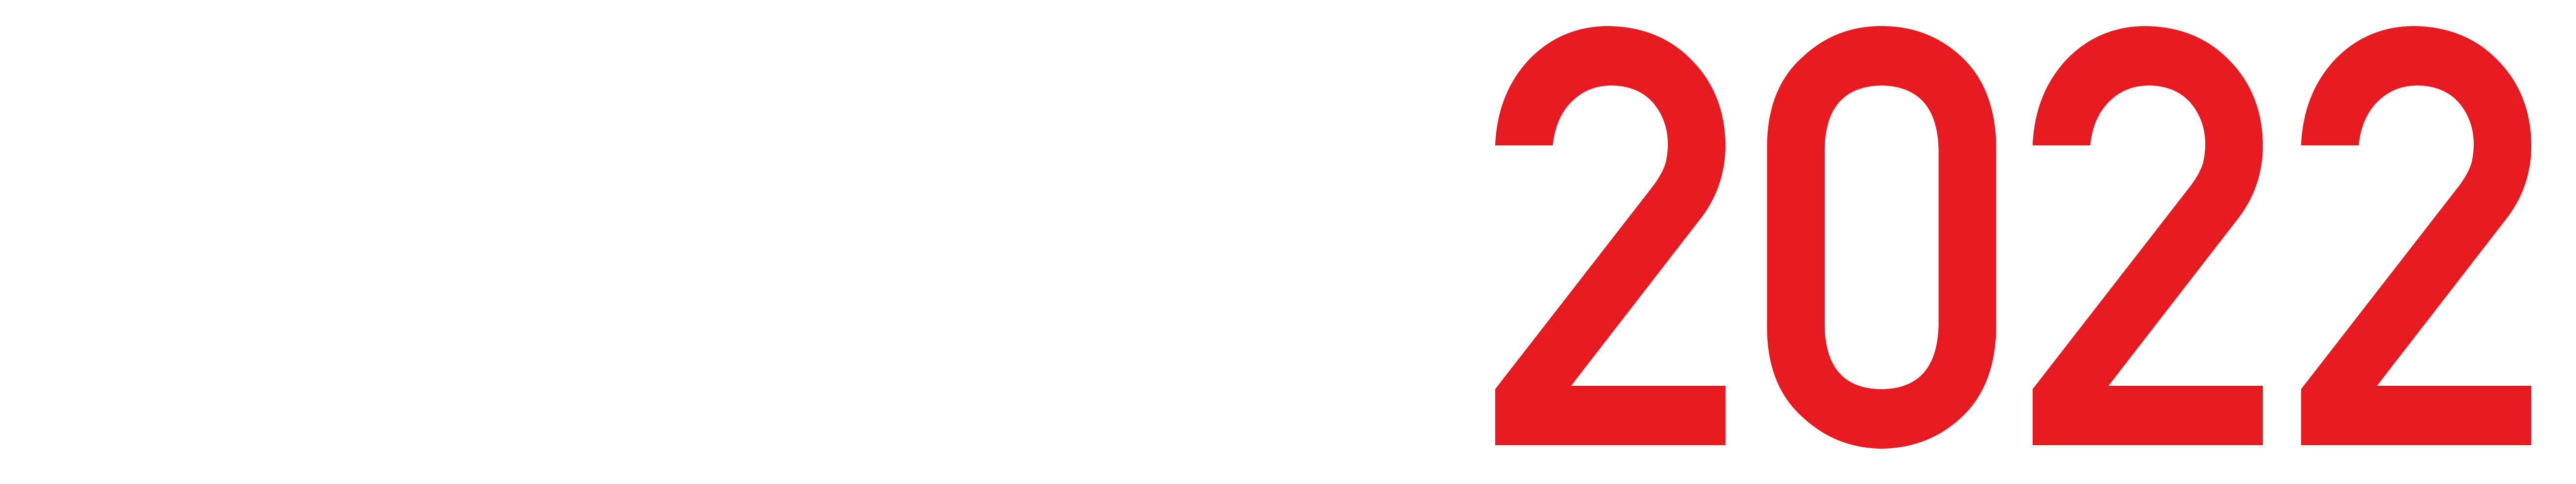 S-CUP 2021